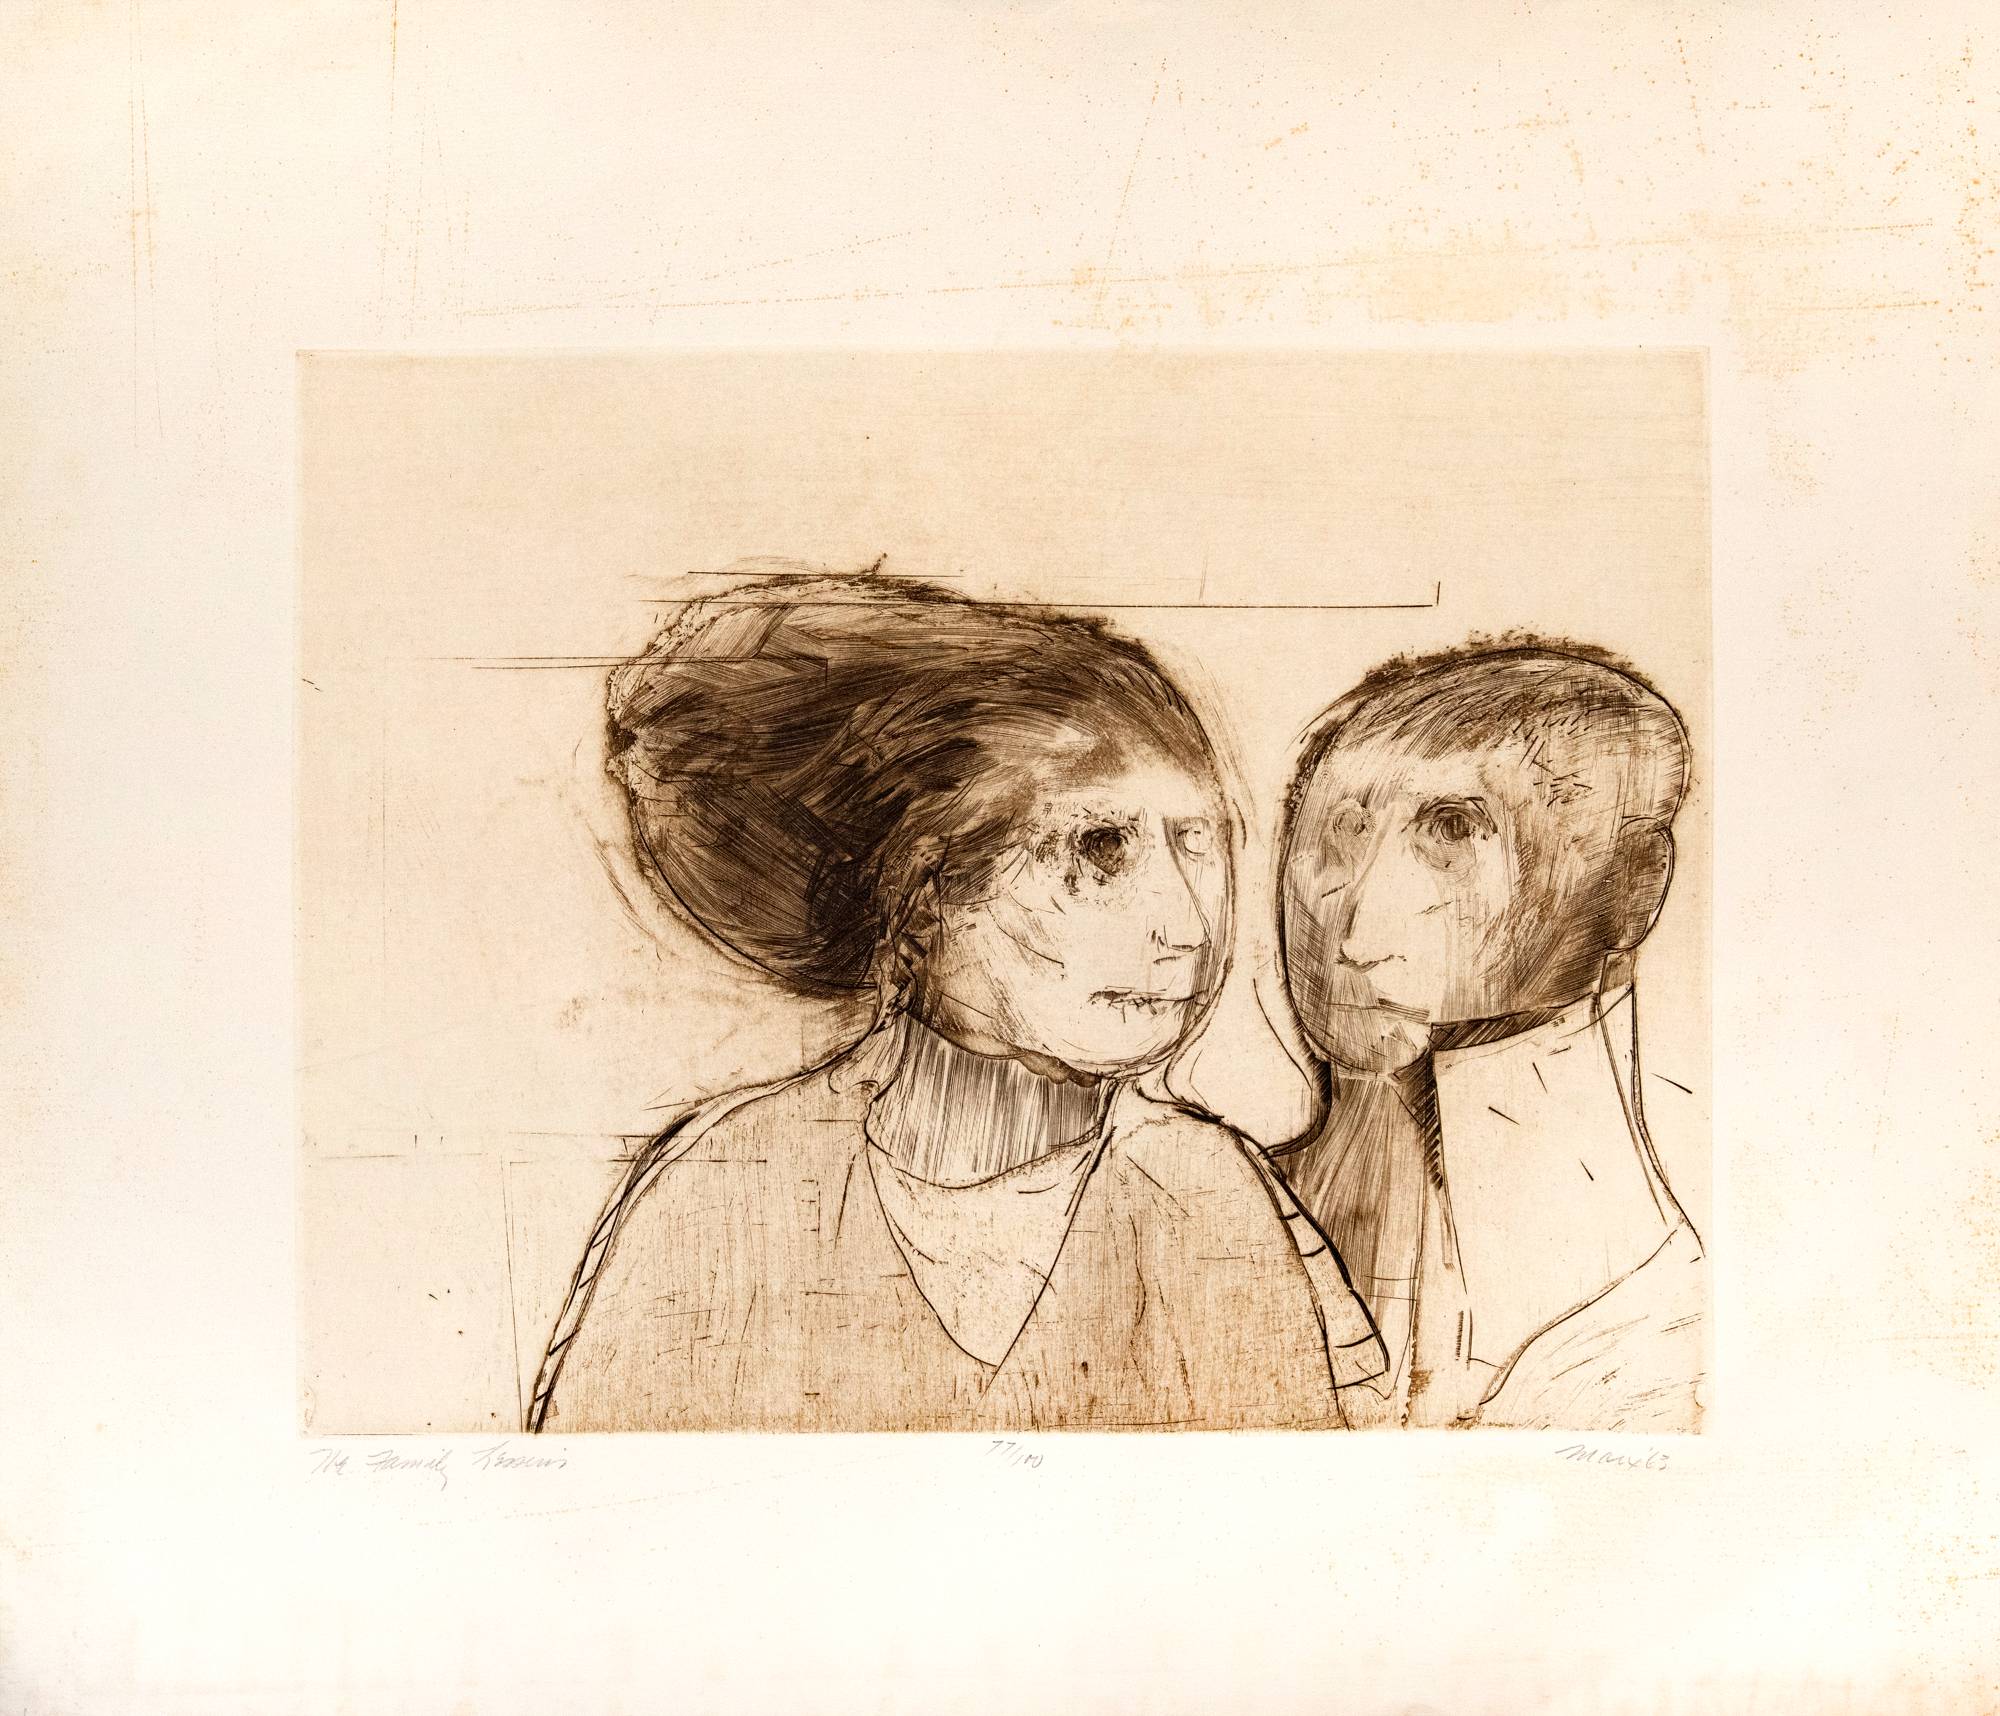 engraving of two people's heads